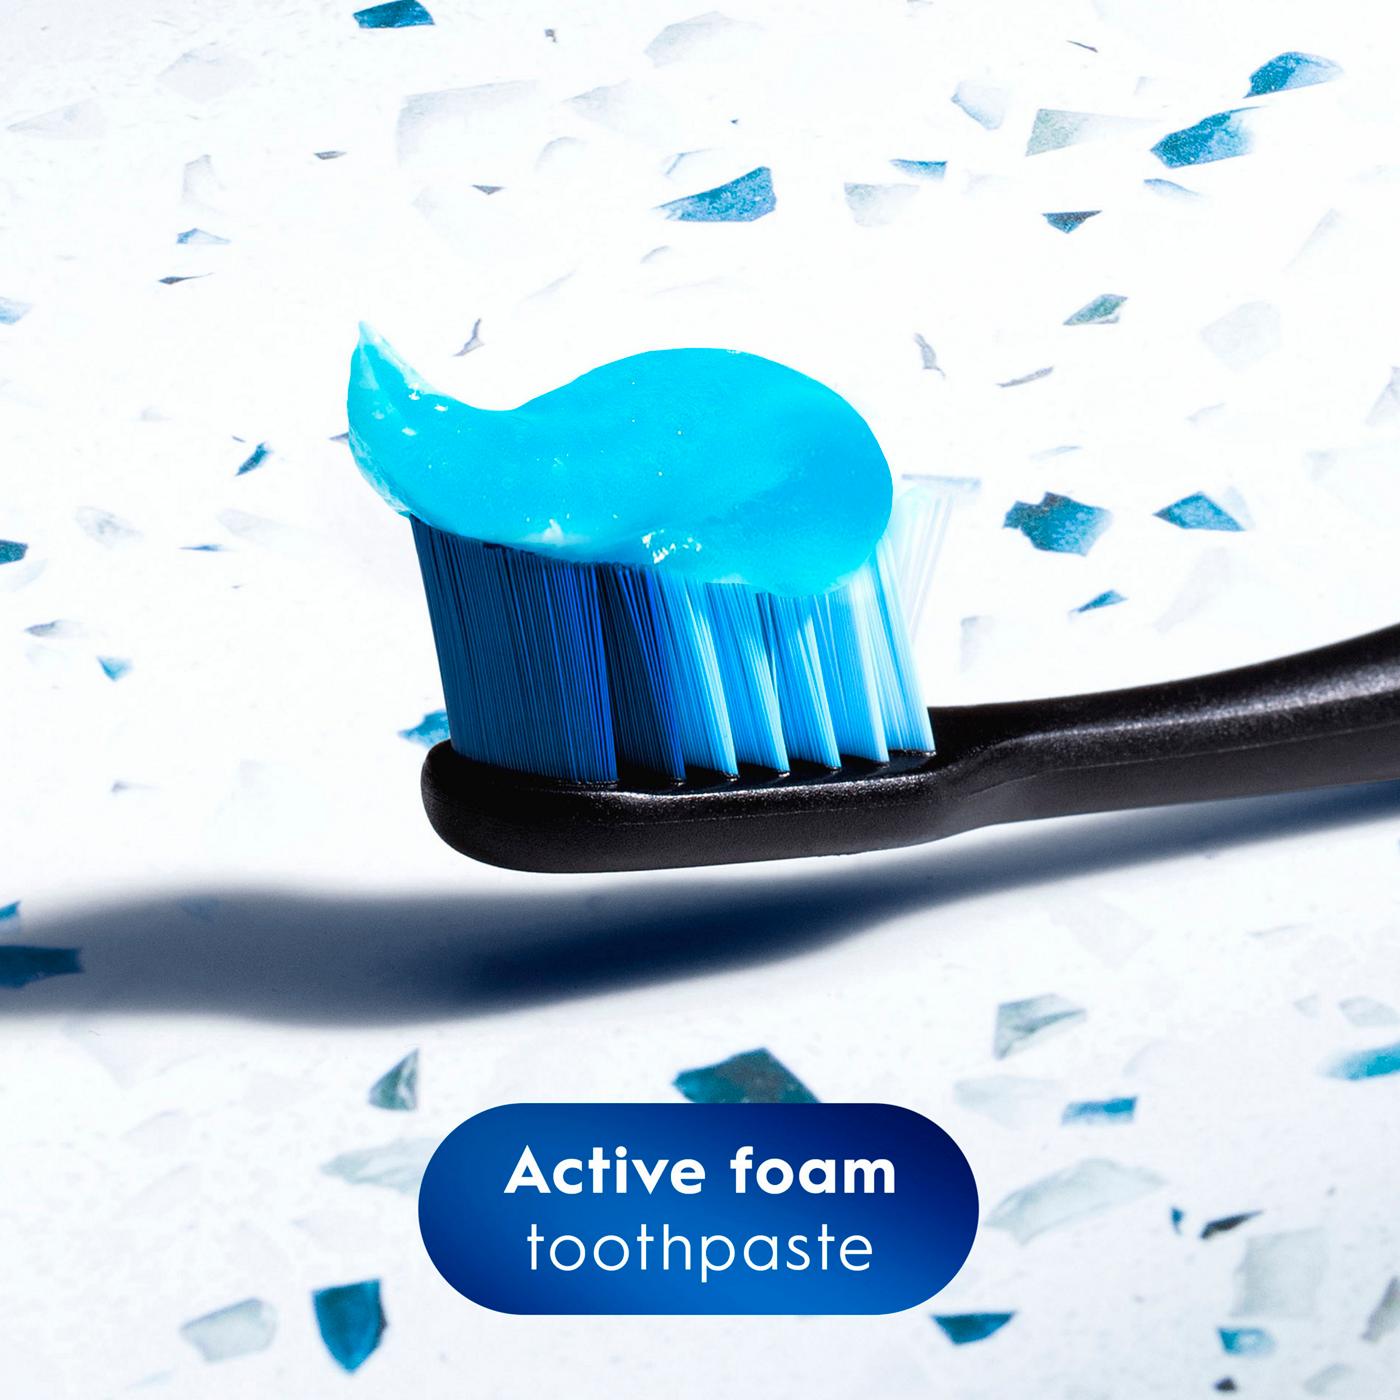 Crest Premium + Advanced Whitening Active Foam Toothpaste - Clean Mint; image 6 of 8